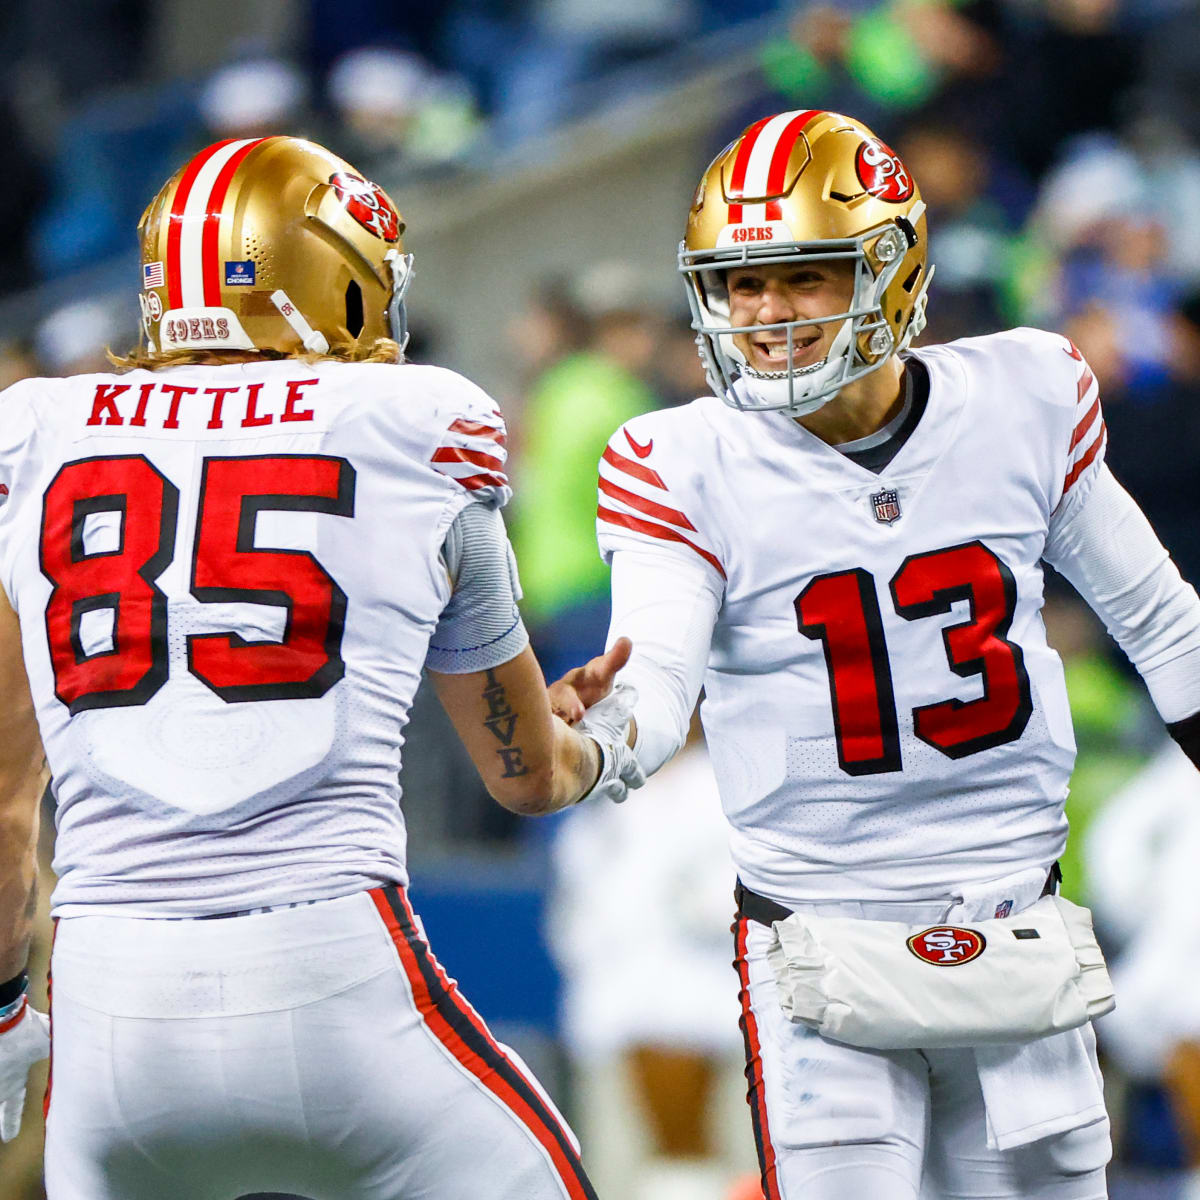 George Kittle fantasy football stats: 49ers TE held catchless in